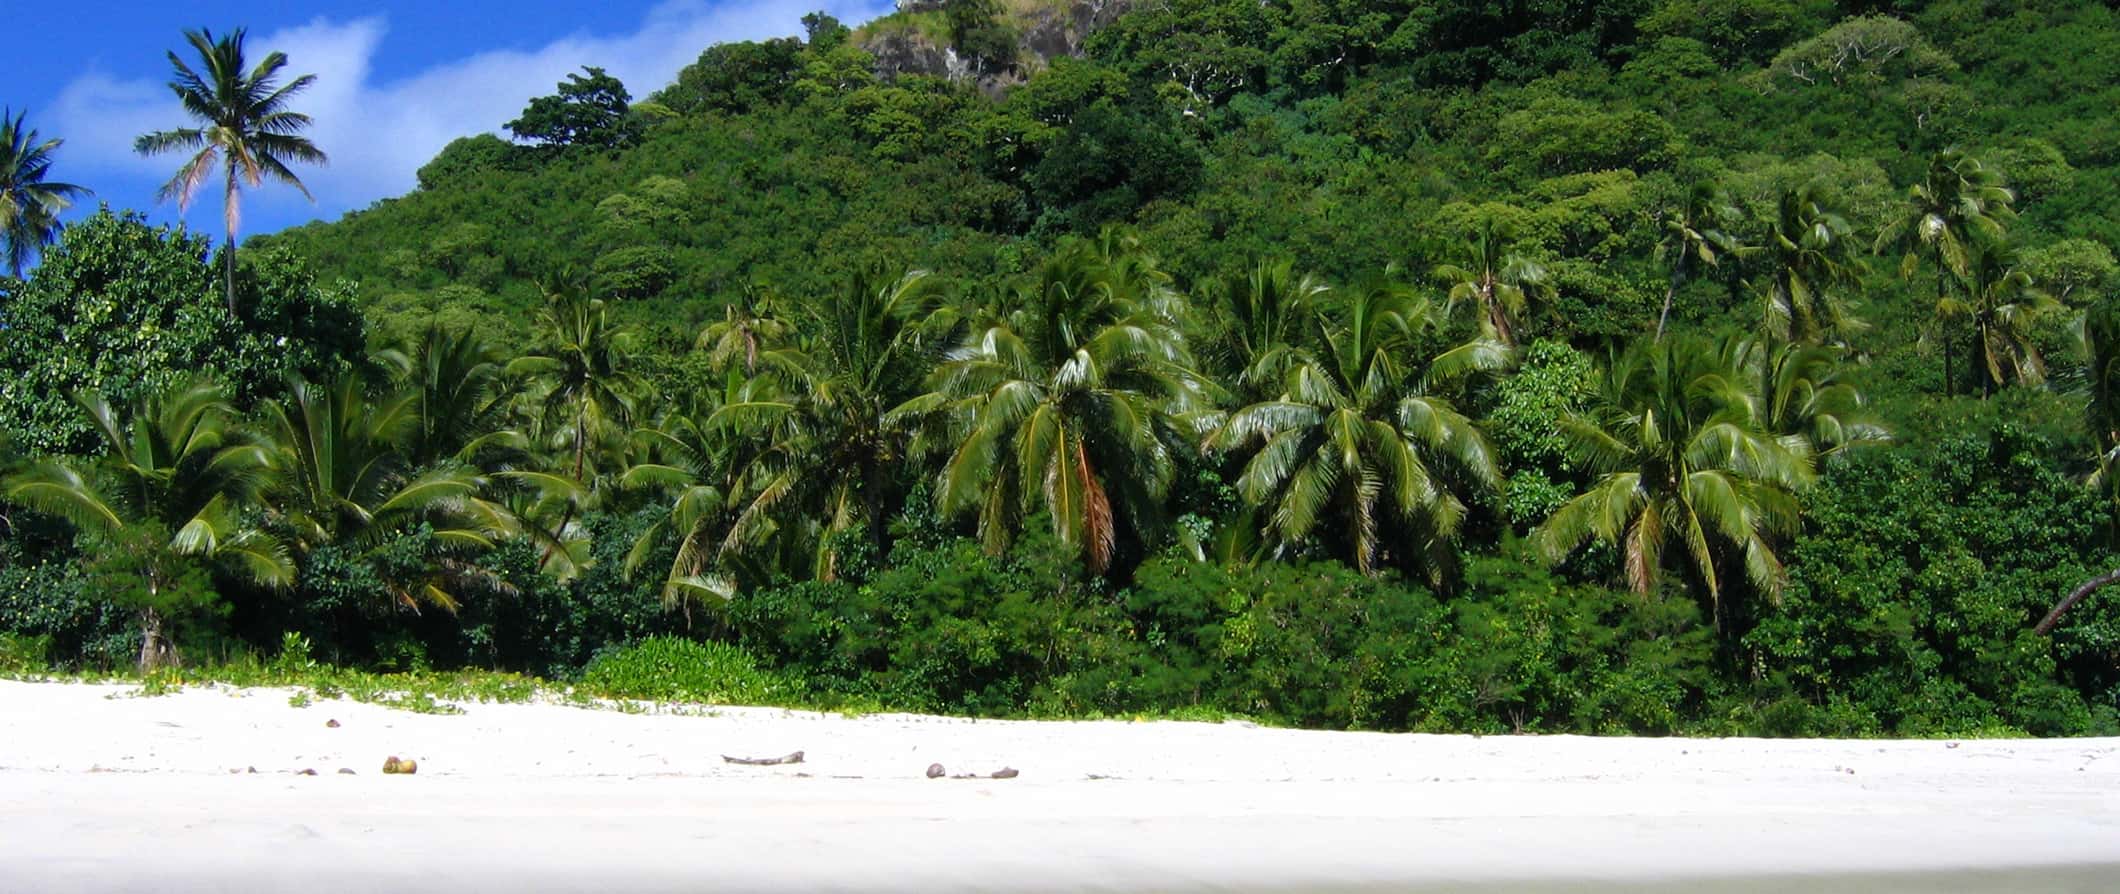 A view of the lush green jungles along the sunny coast of the Yasawa Islands in Fiji